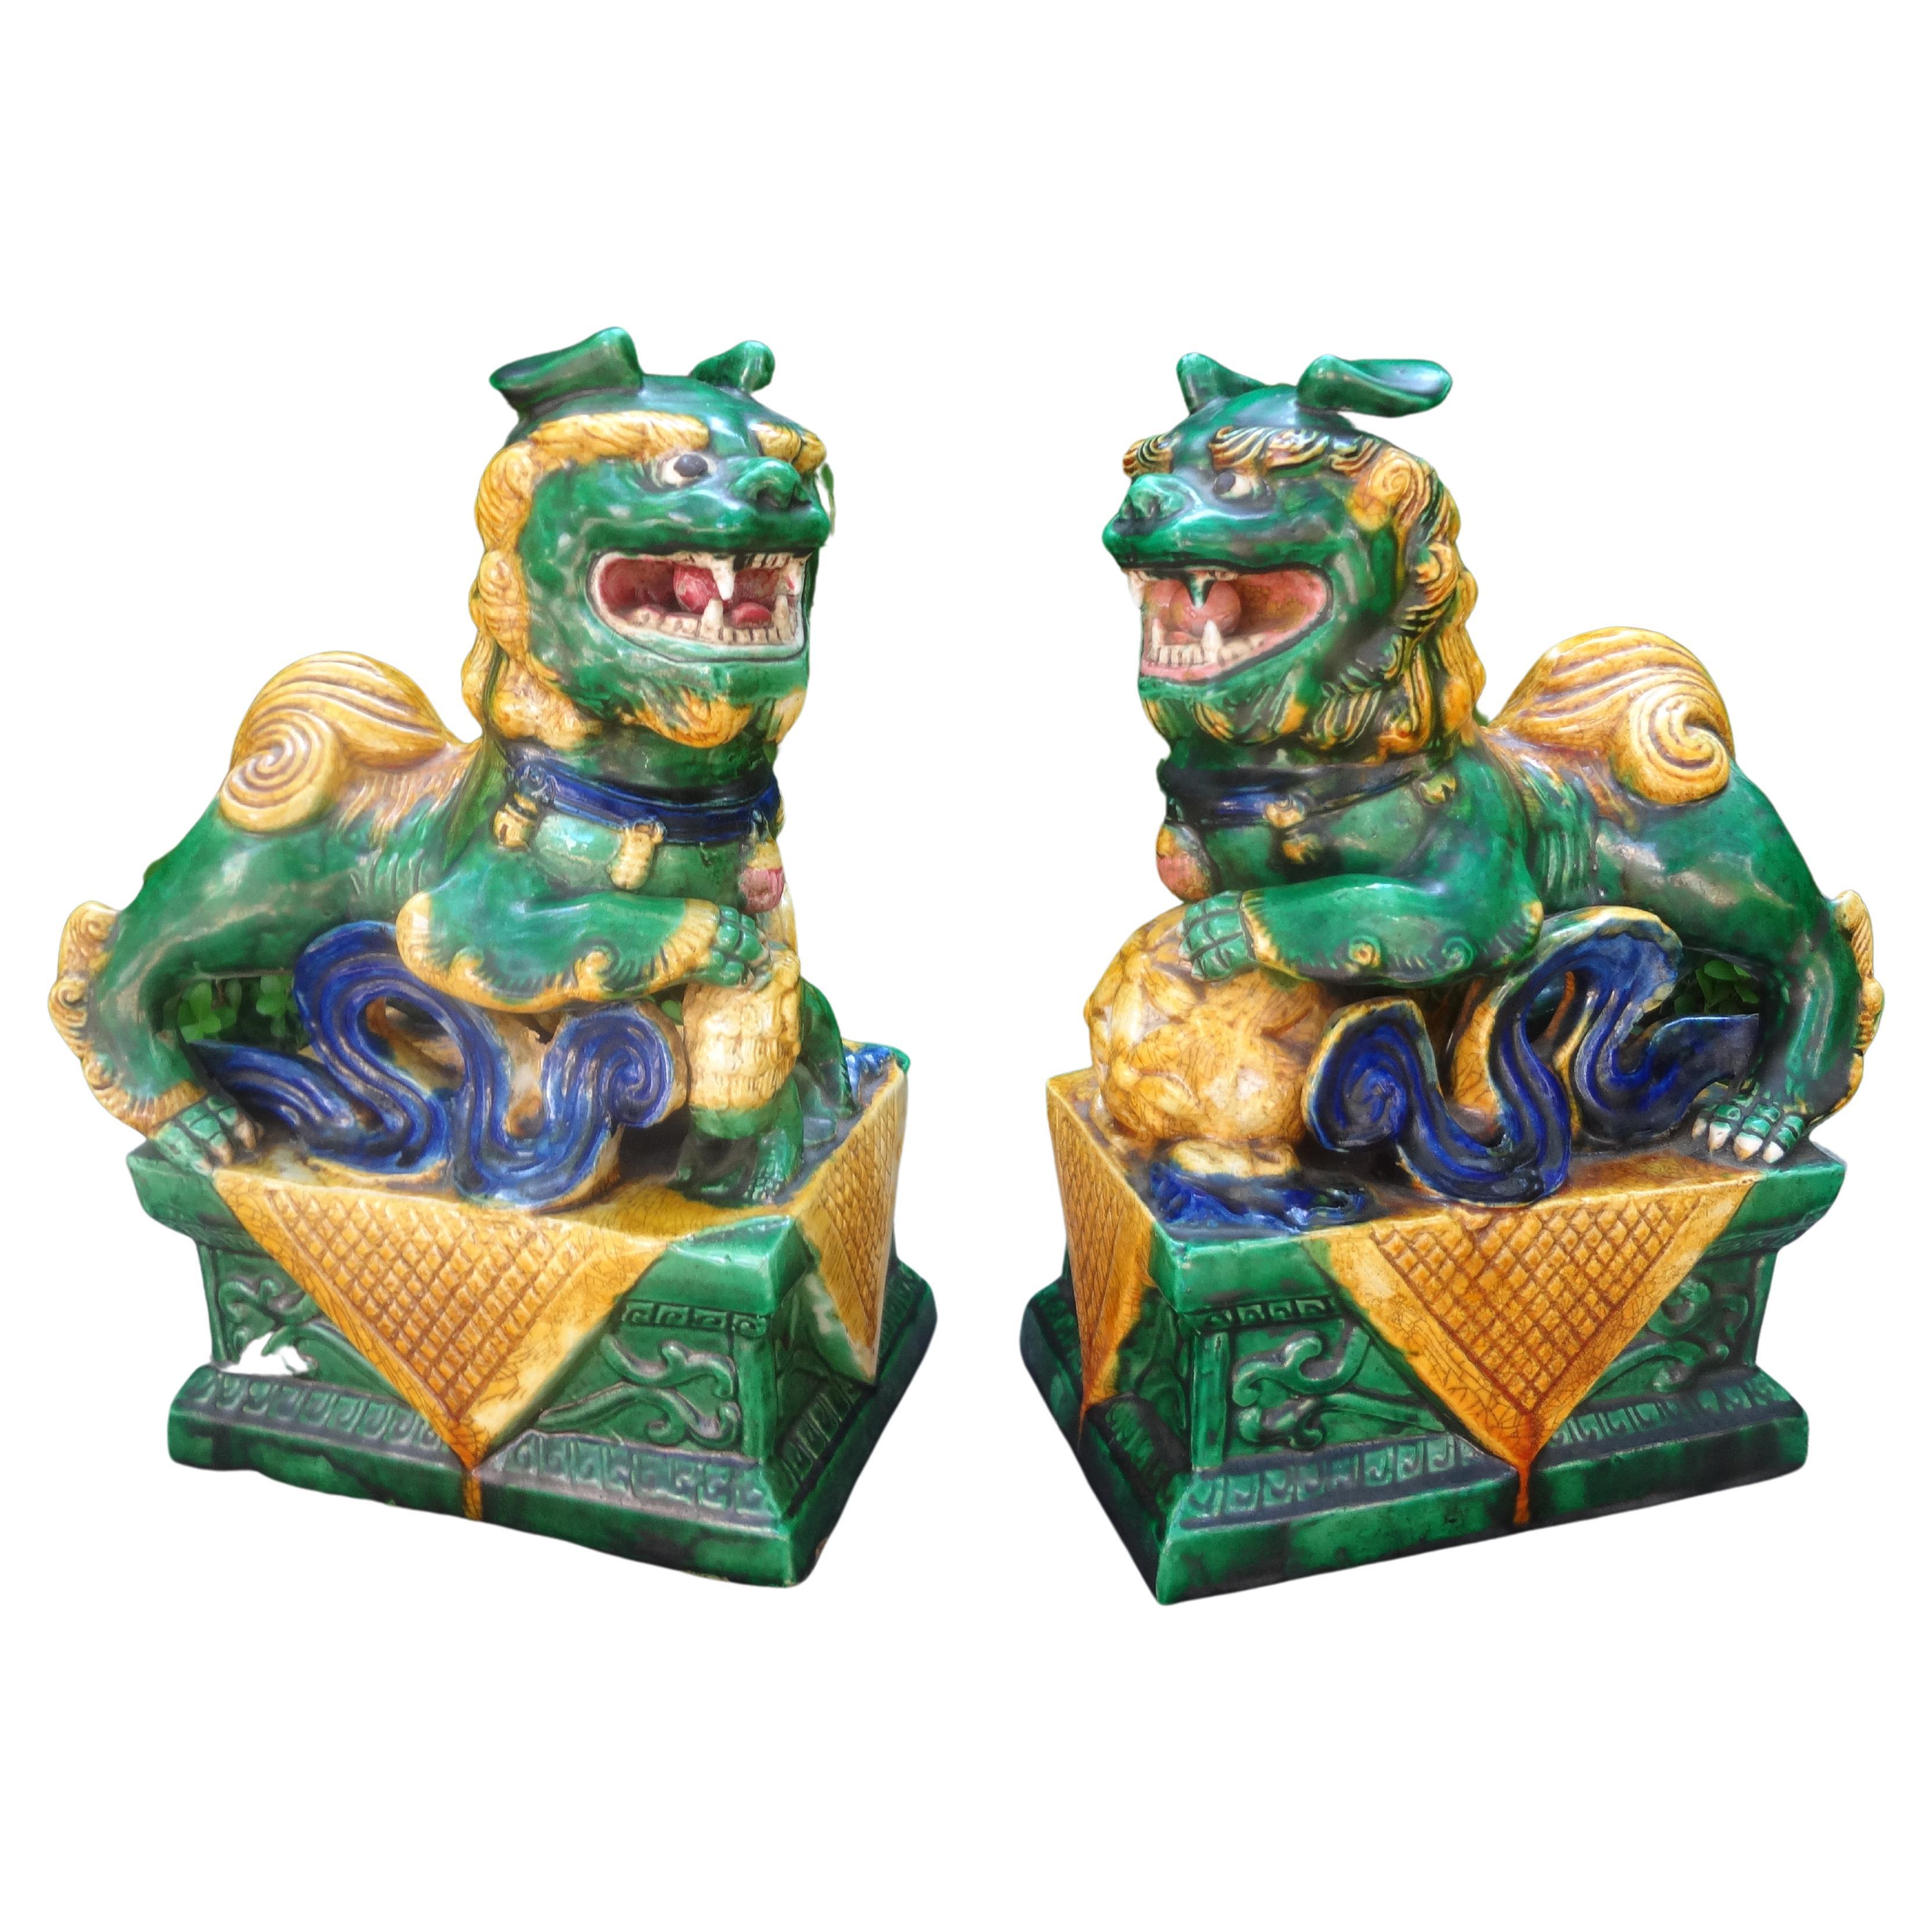 Pair of Chinese Glazed Terracotta Foo Dogs or Foo Lions.
Stunning nice scale pair of 20th century Chinese foo dogs or foo lions. This great pair of Chinese export foo dogs were executed in beautiful colors and feature a male and a female. 
Lovely